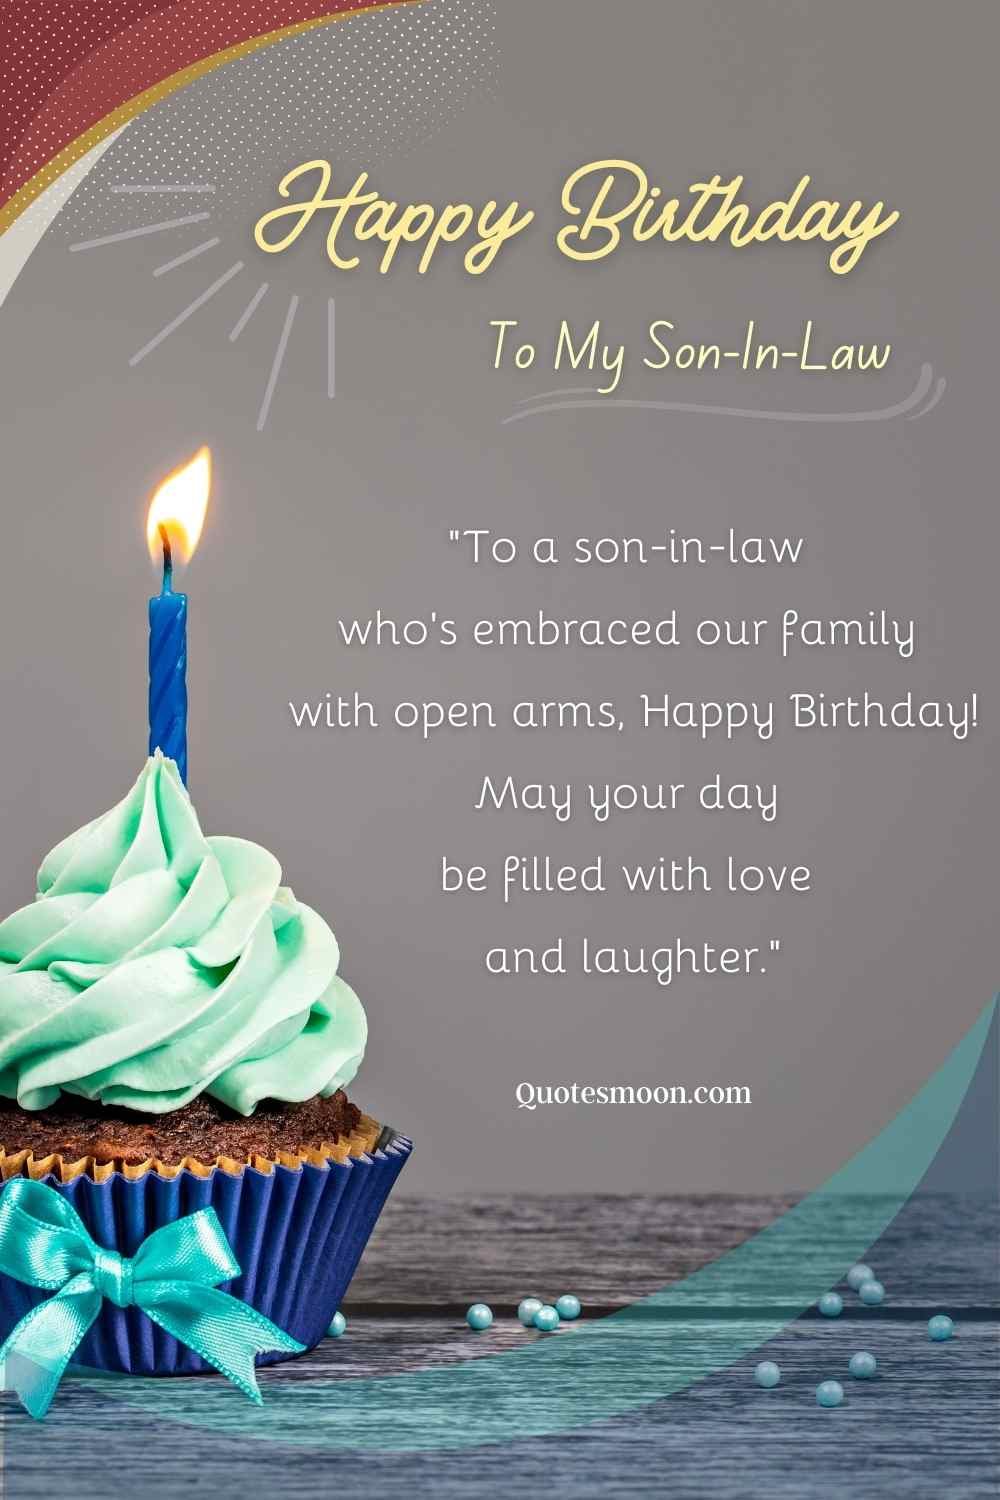 happy birthday to my son in law quotes image